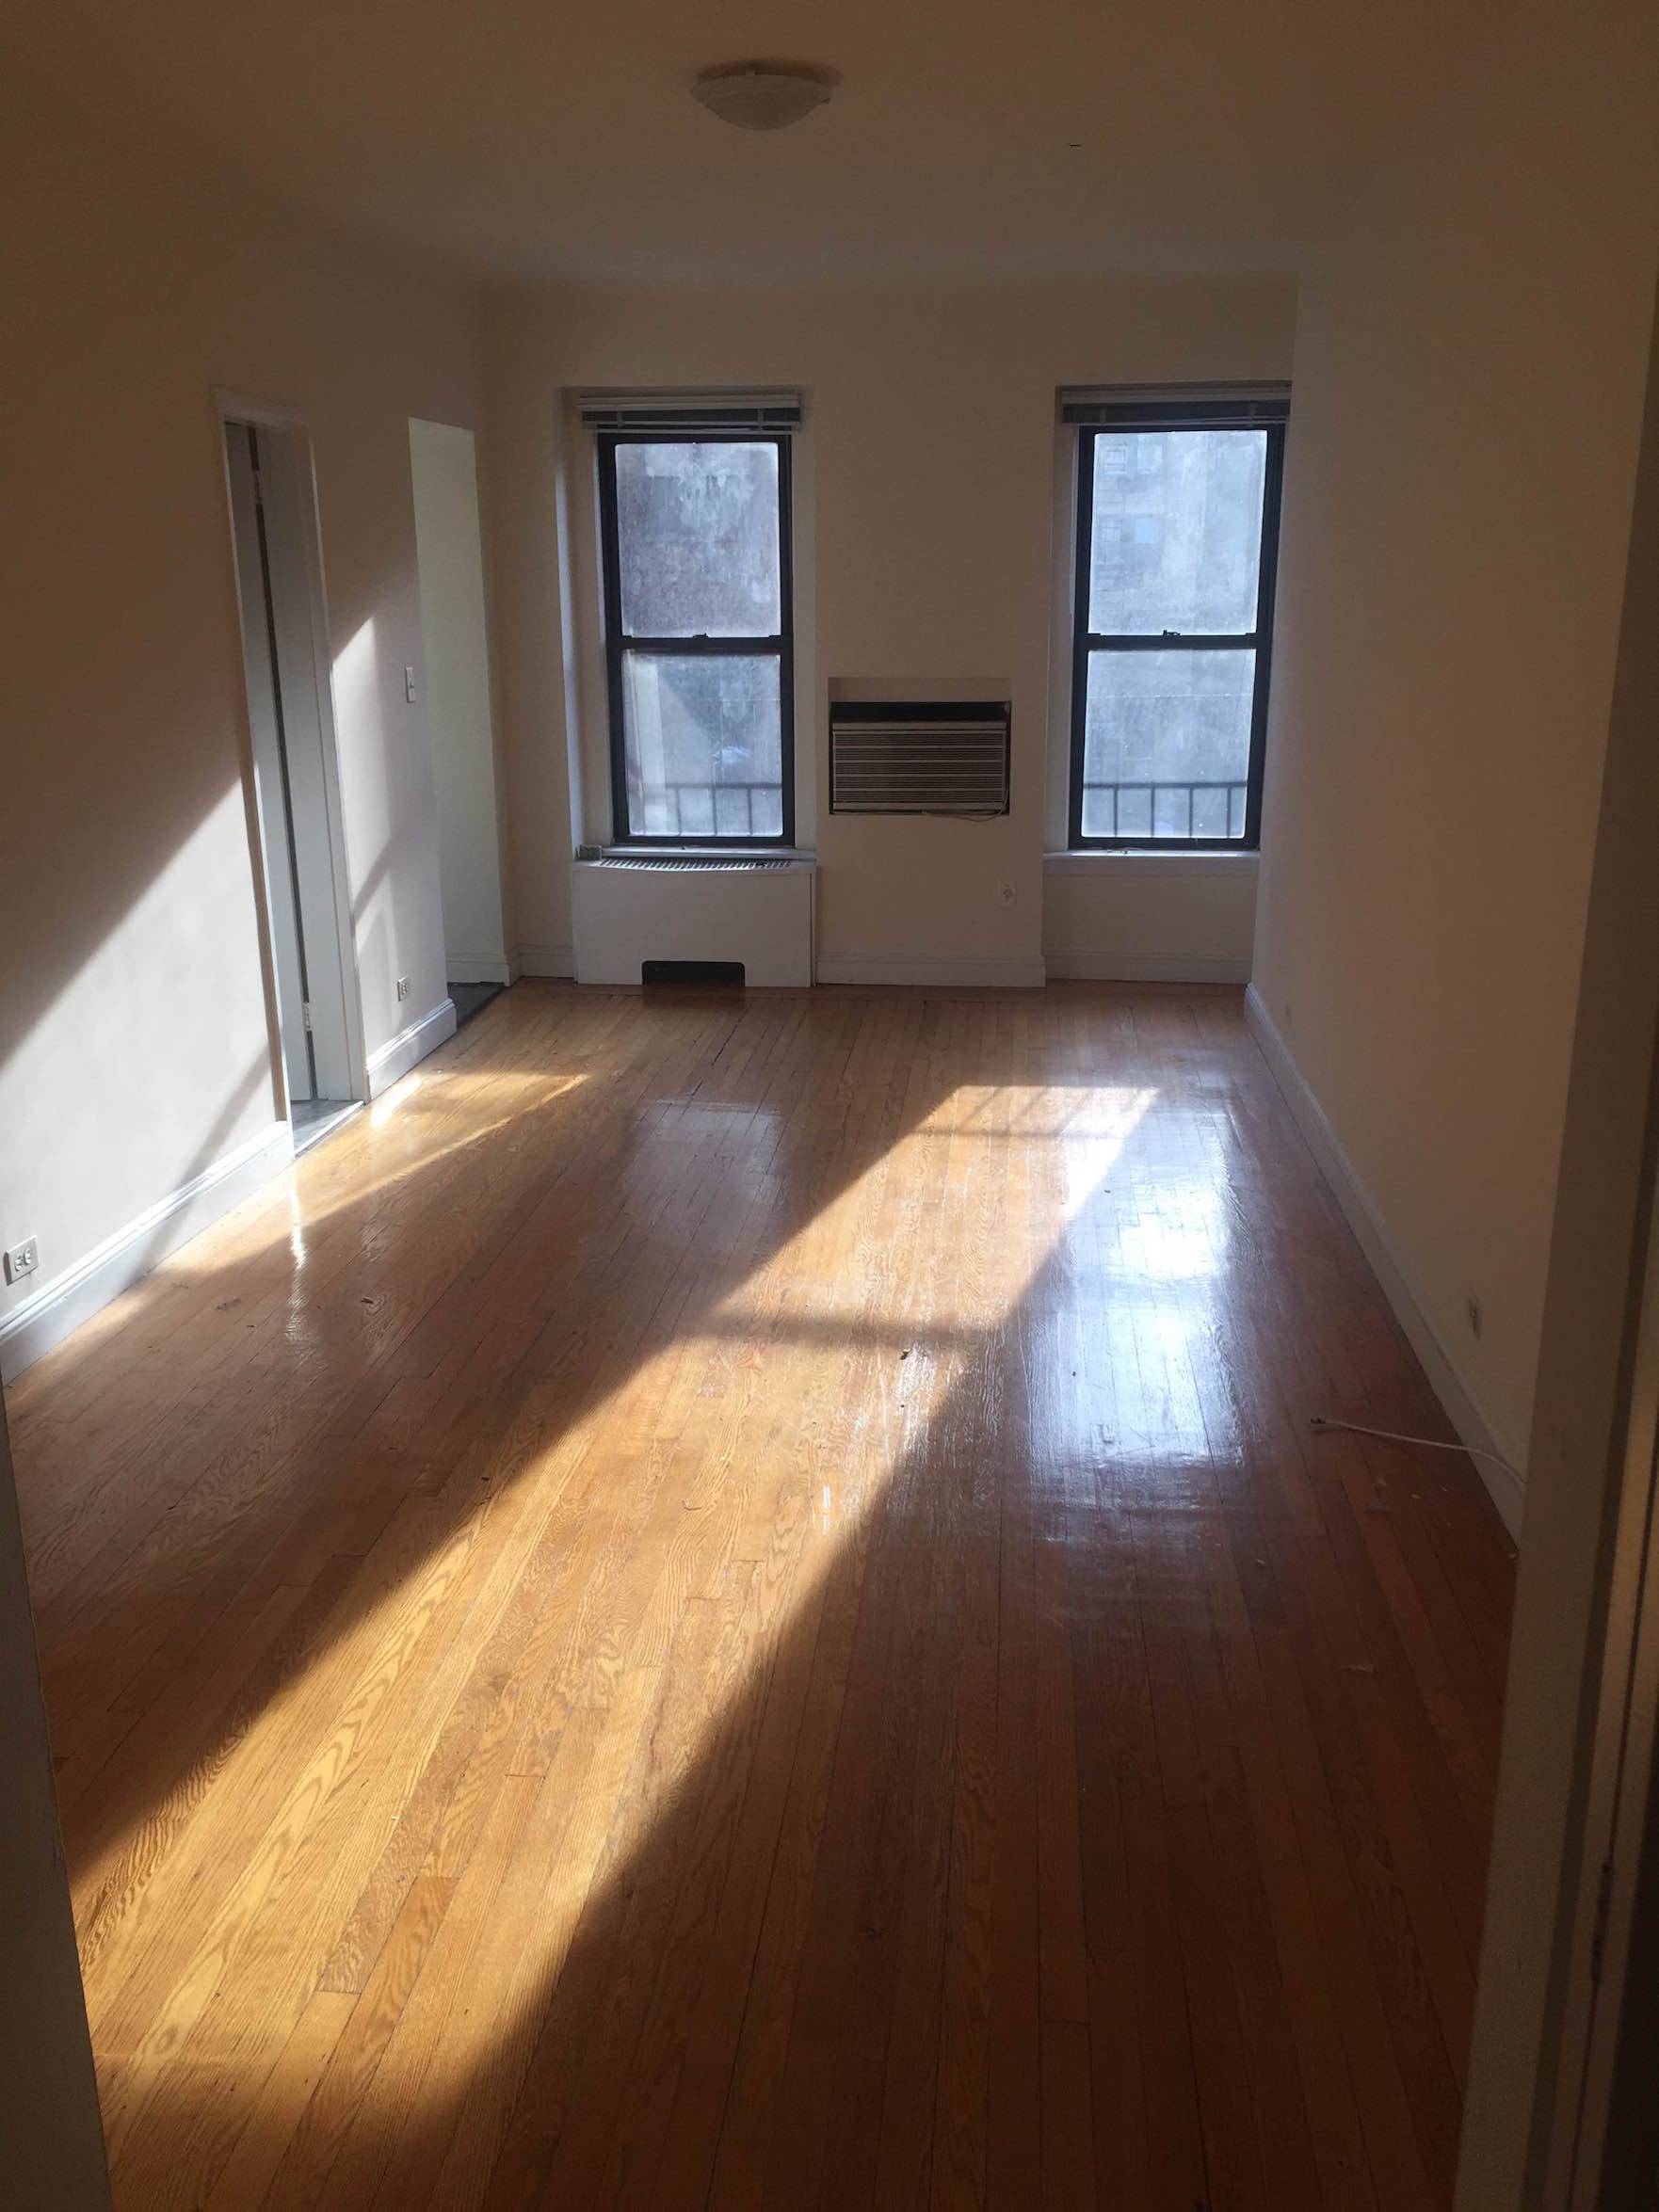 Prime Upper East Side location between Lexington and 3rd ave-1 Bed +1 Bath Lease Assignment in elevator building.